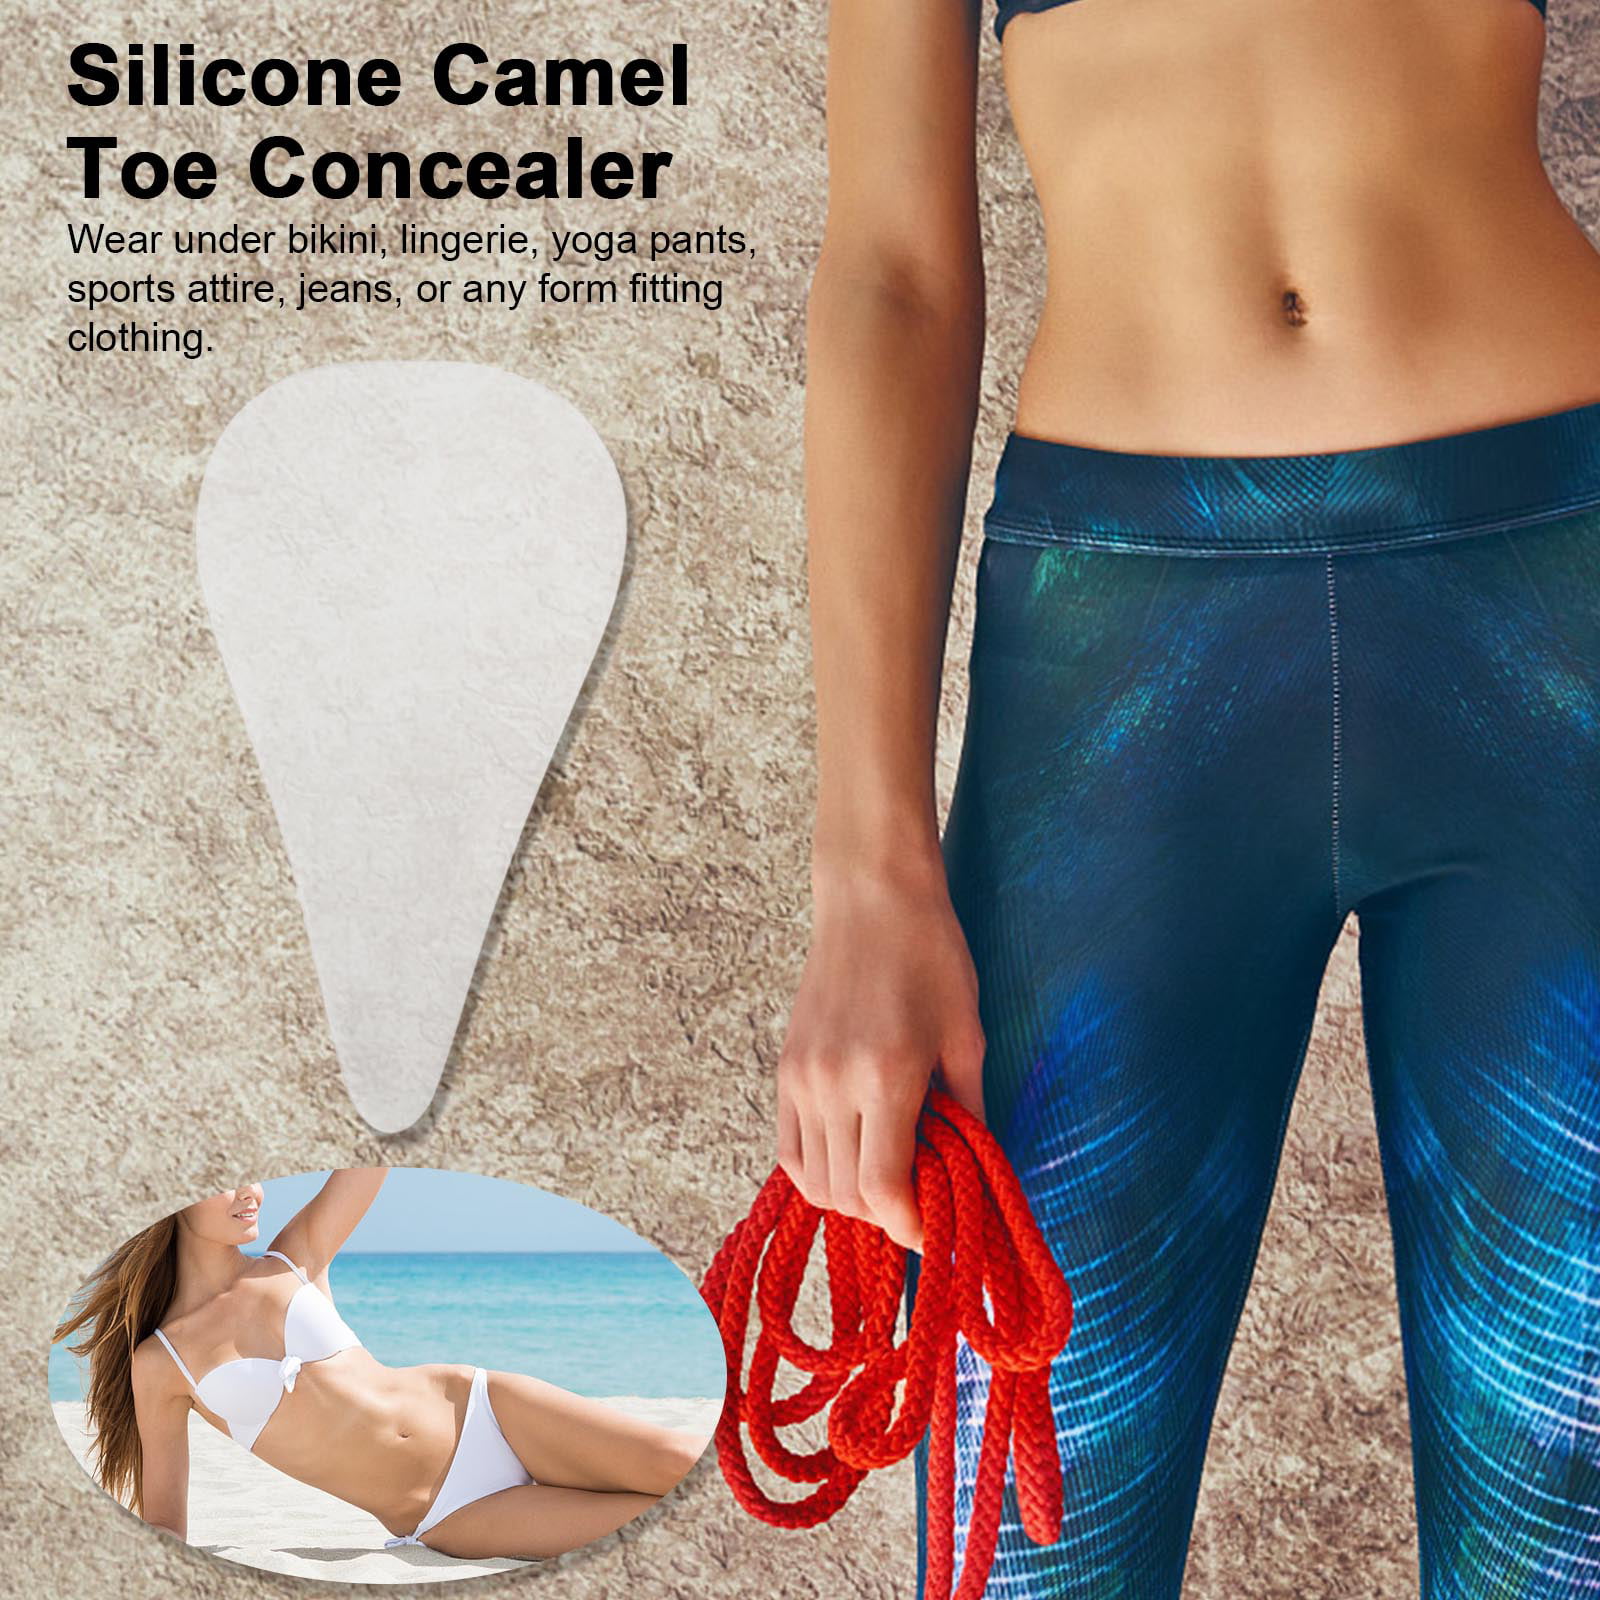 SWIM Swimwear Activewear Wear Under Leggings Silicone Valley Camel Toe Concealer Reusable Adhesive Silicone 